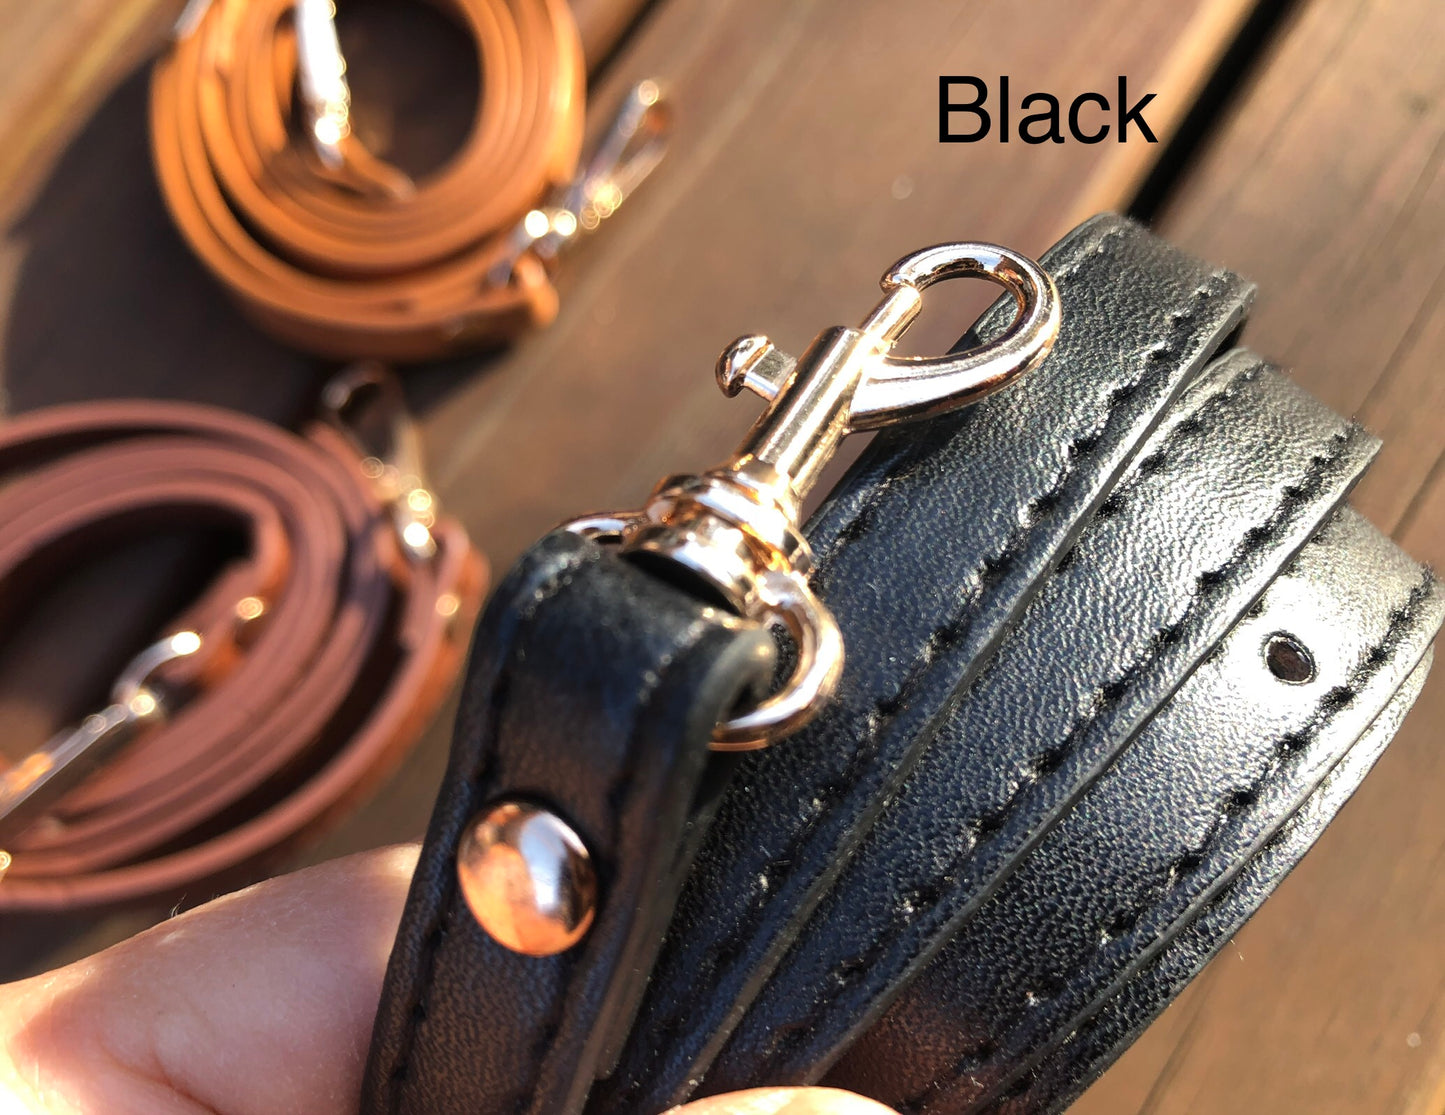 Faux  leather straps, adjustable crossbody straps, straps for bags, leather handles with brass hardware for handmade bags